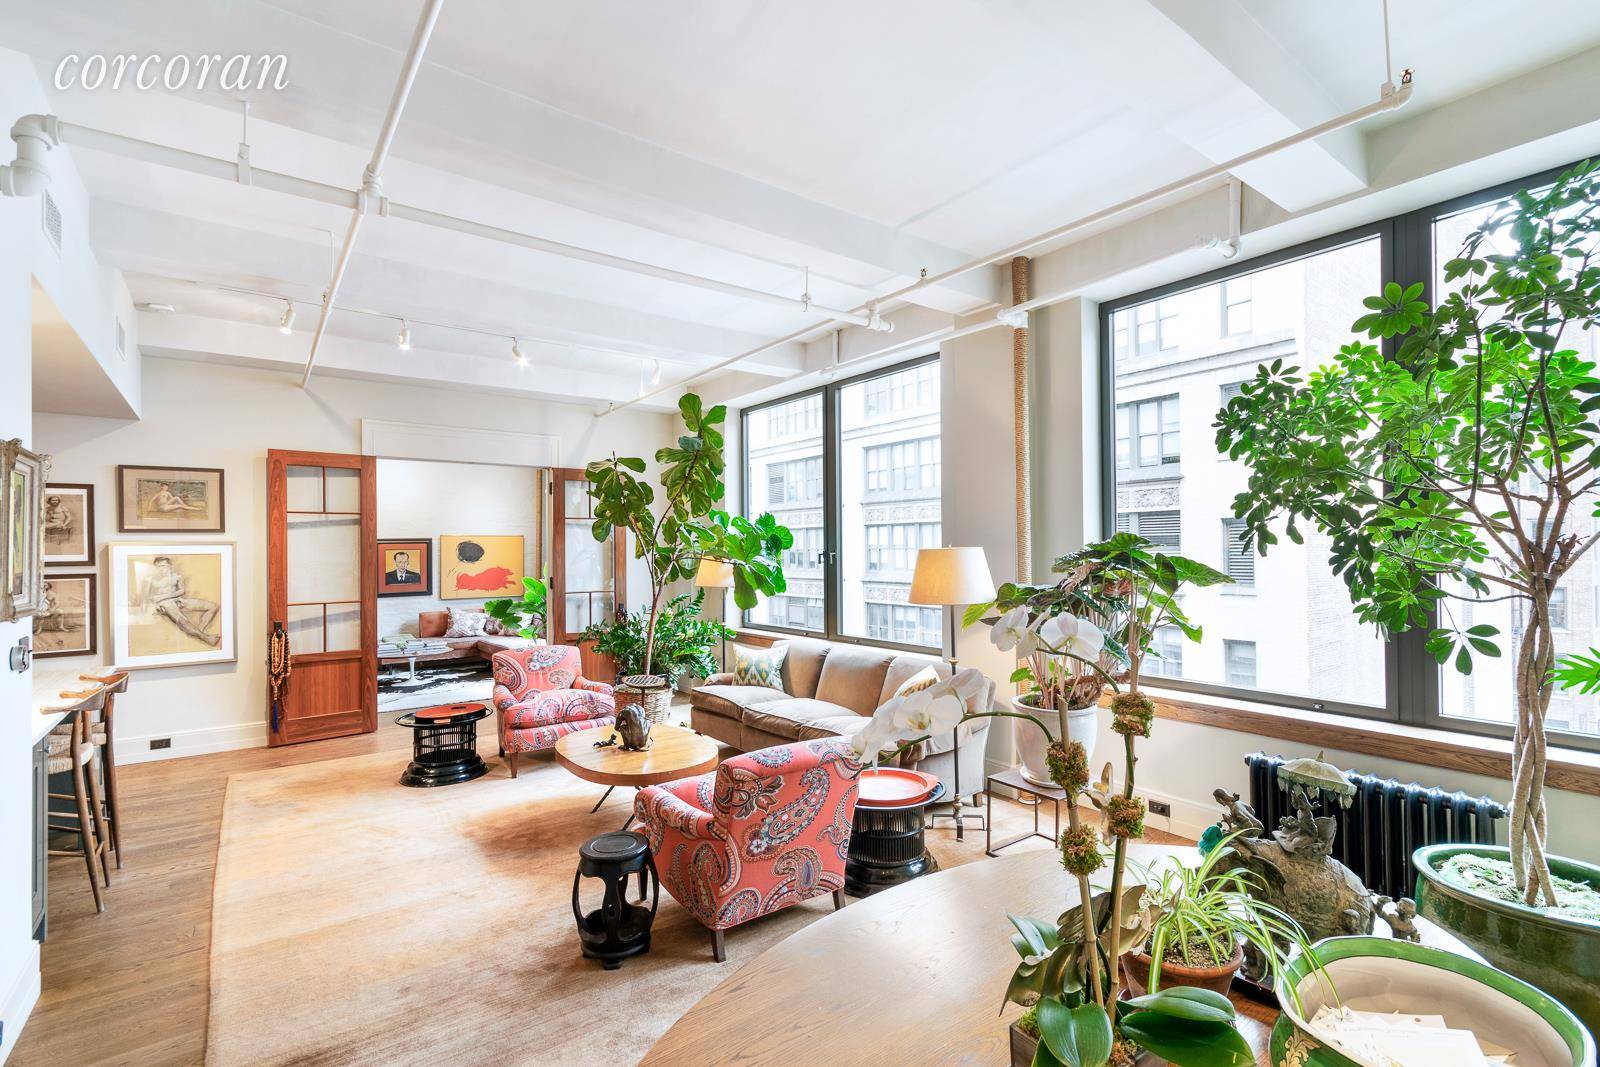 This gloriously renovated 4000 square foot loft apartment, the full 9th floor, was designed by renowned decorator Fernando Santangelo of Chateau Marmont Hotel in Los Angeles fame, and is located ...